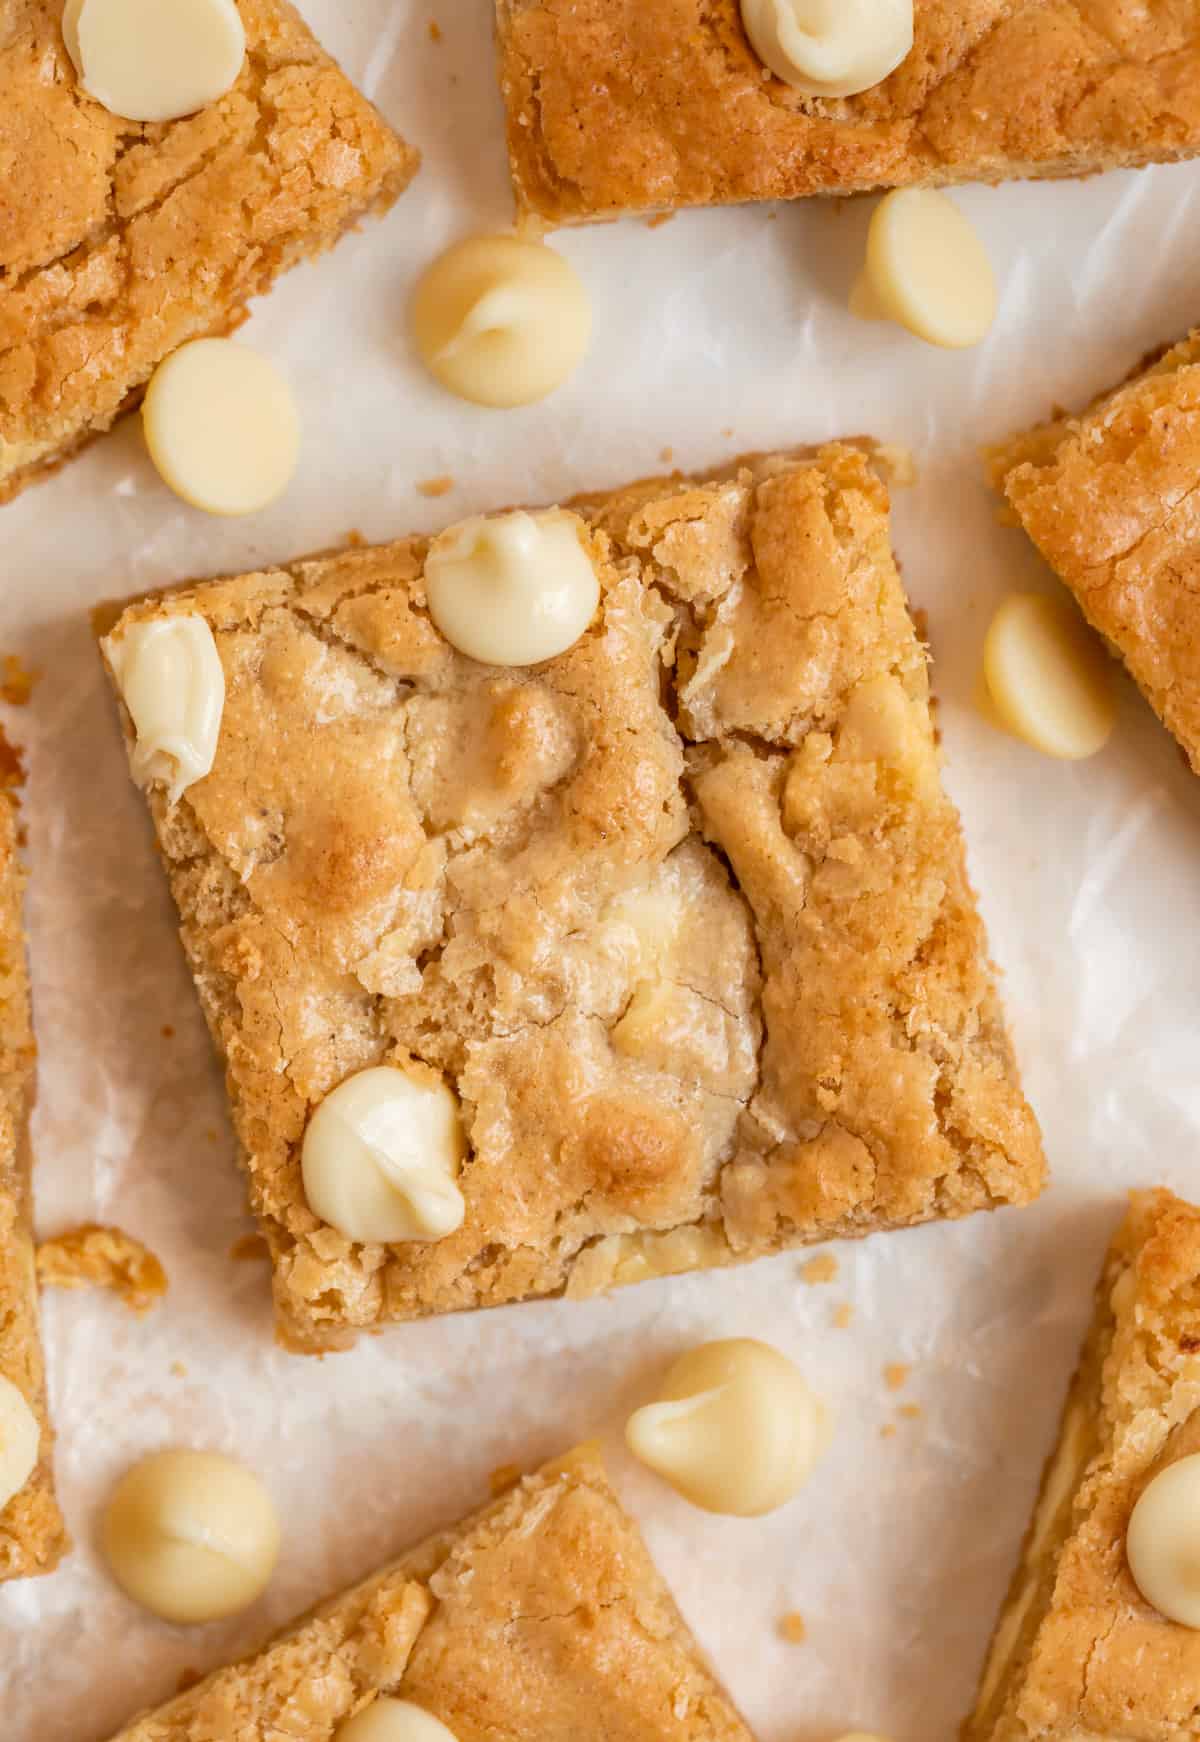 Gluten free blondies with white chocolate chips arranged on parchment.